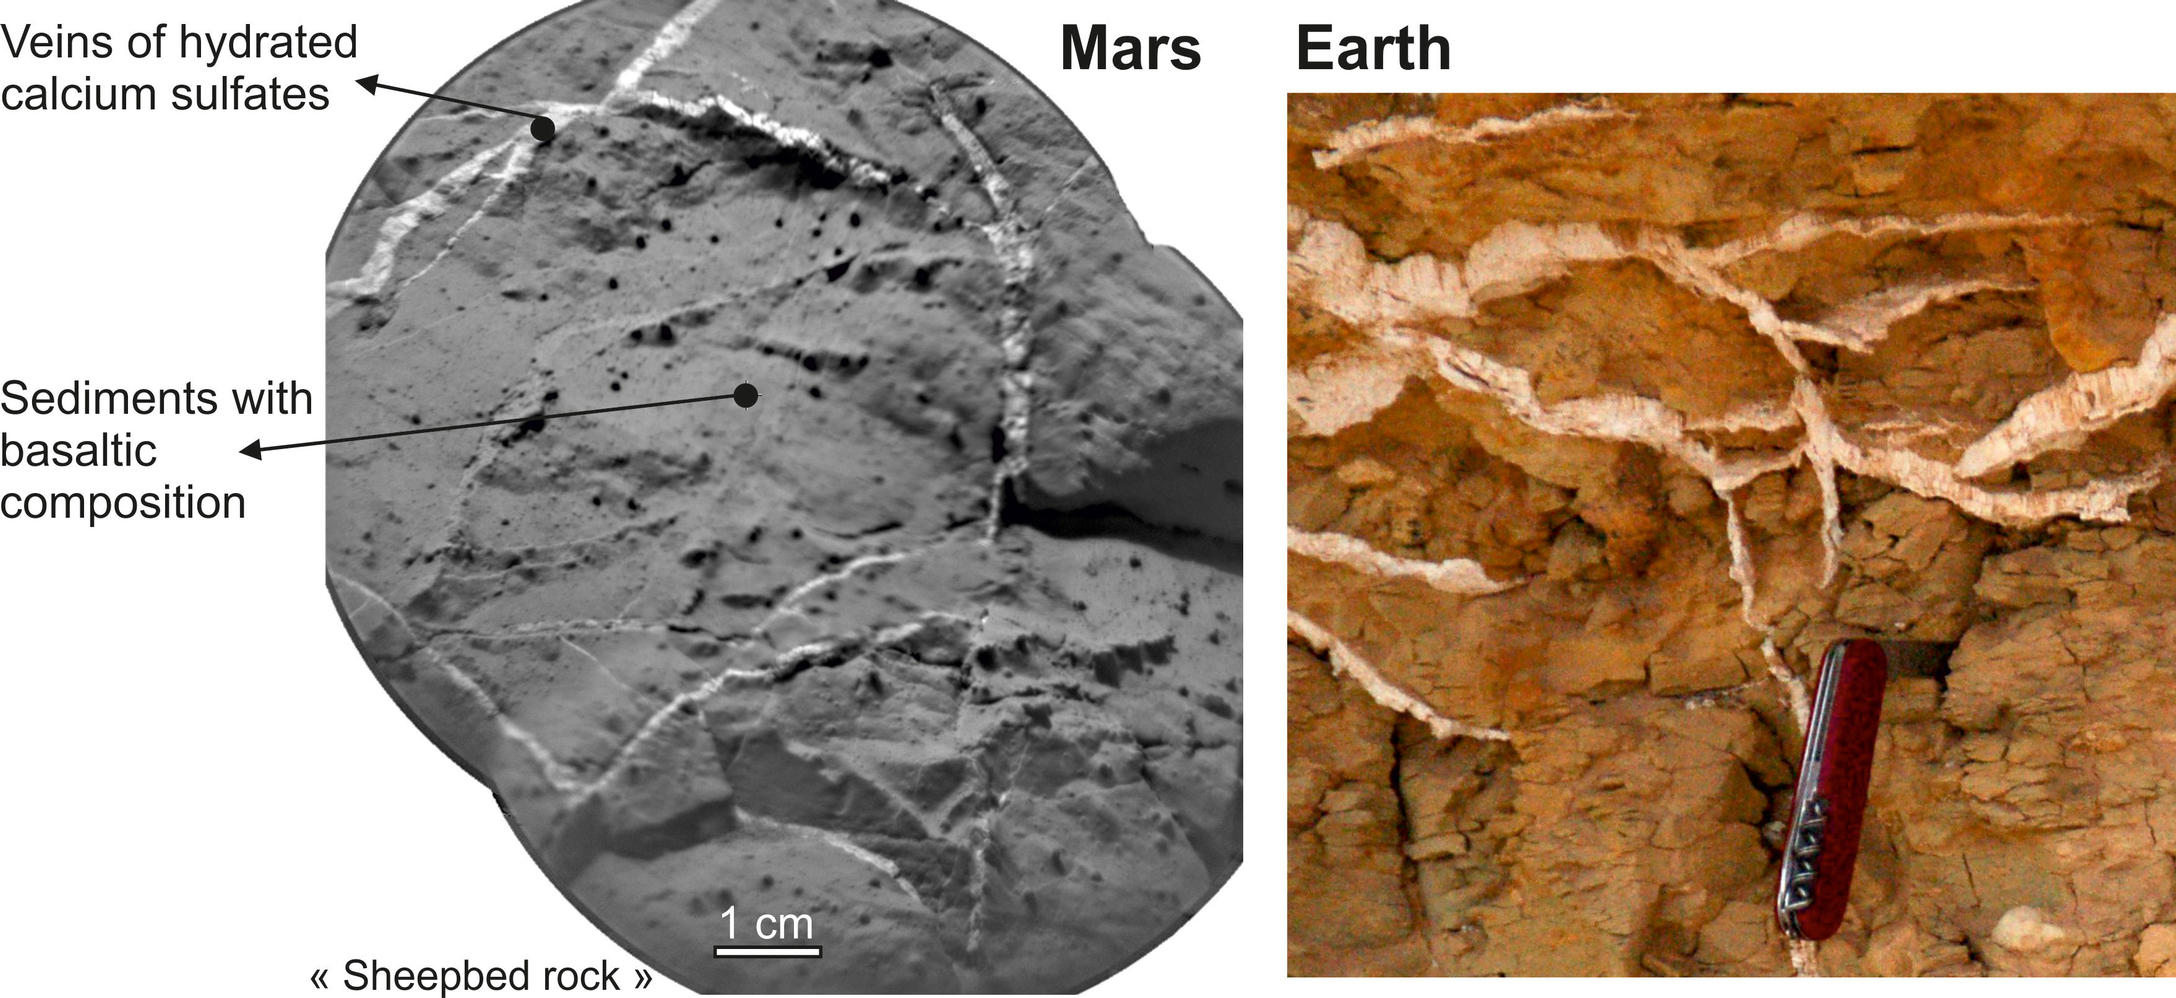 This set of images shows the similarity of sulfate-rich veins seen on Mars by NASA's Curiosity rover to sulfate-rich veins seen on Earth.